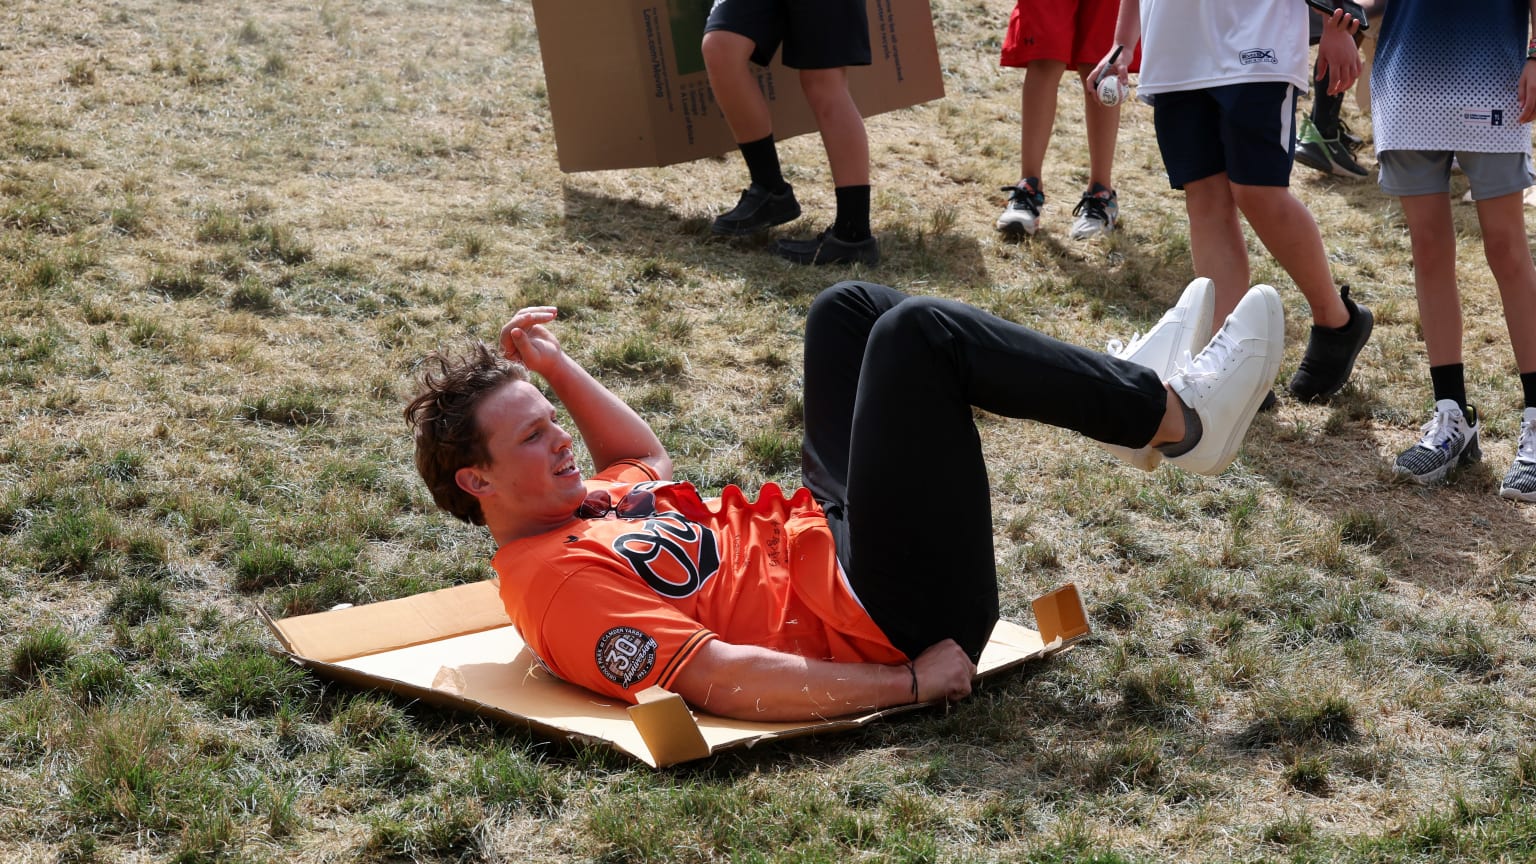 A player in an orange Orioles jersey lies on his back on a piece of cardboard, feet in the air as he slides down a grassy hill